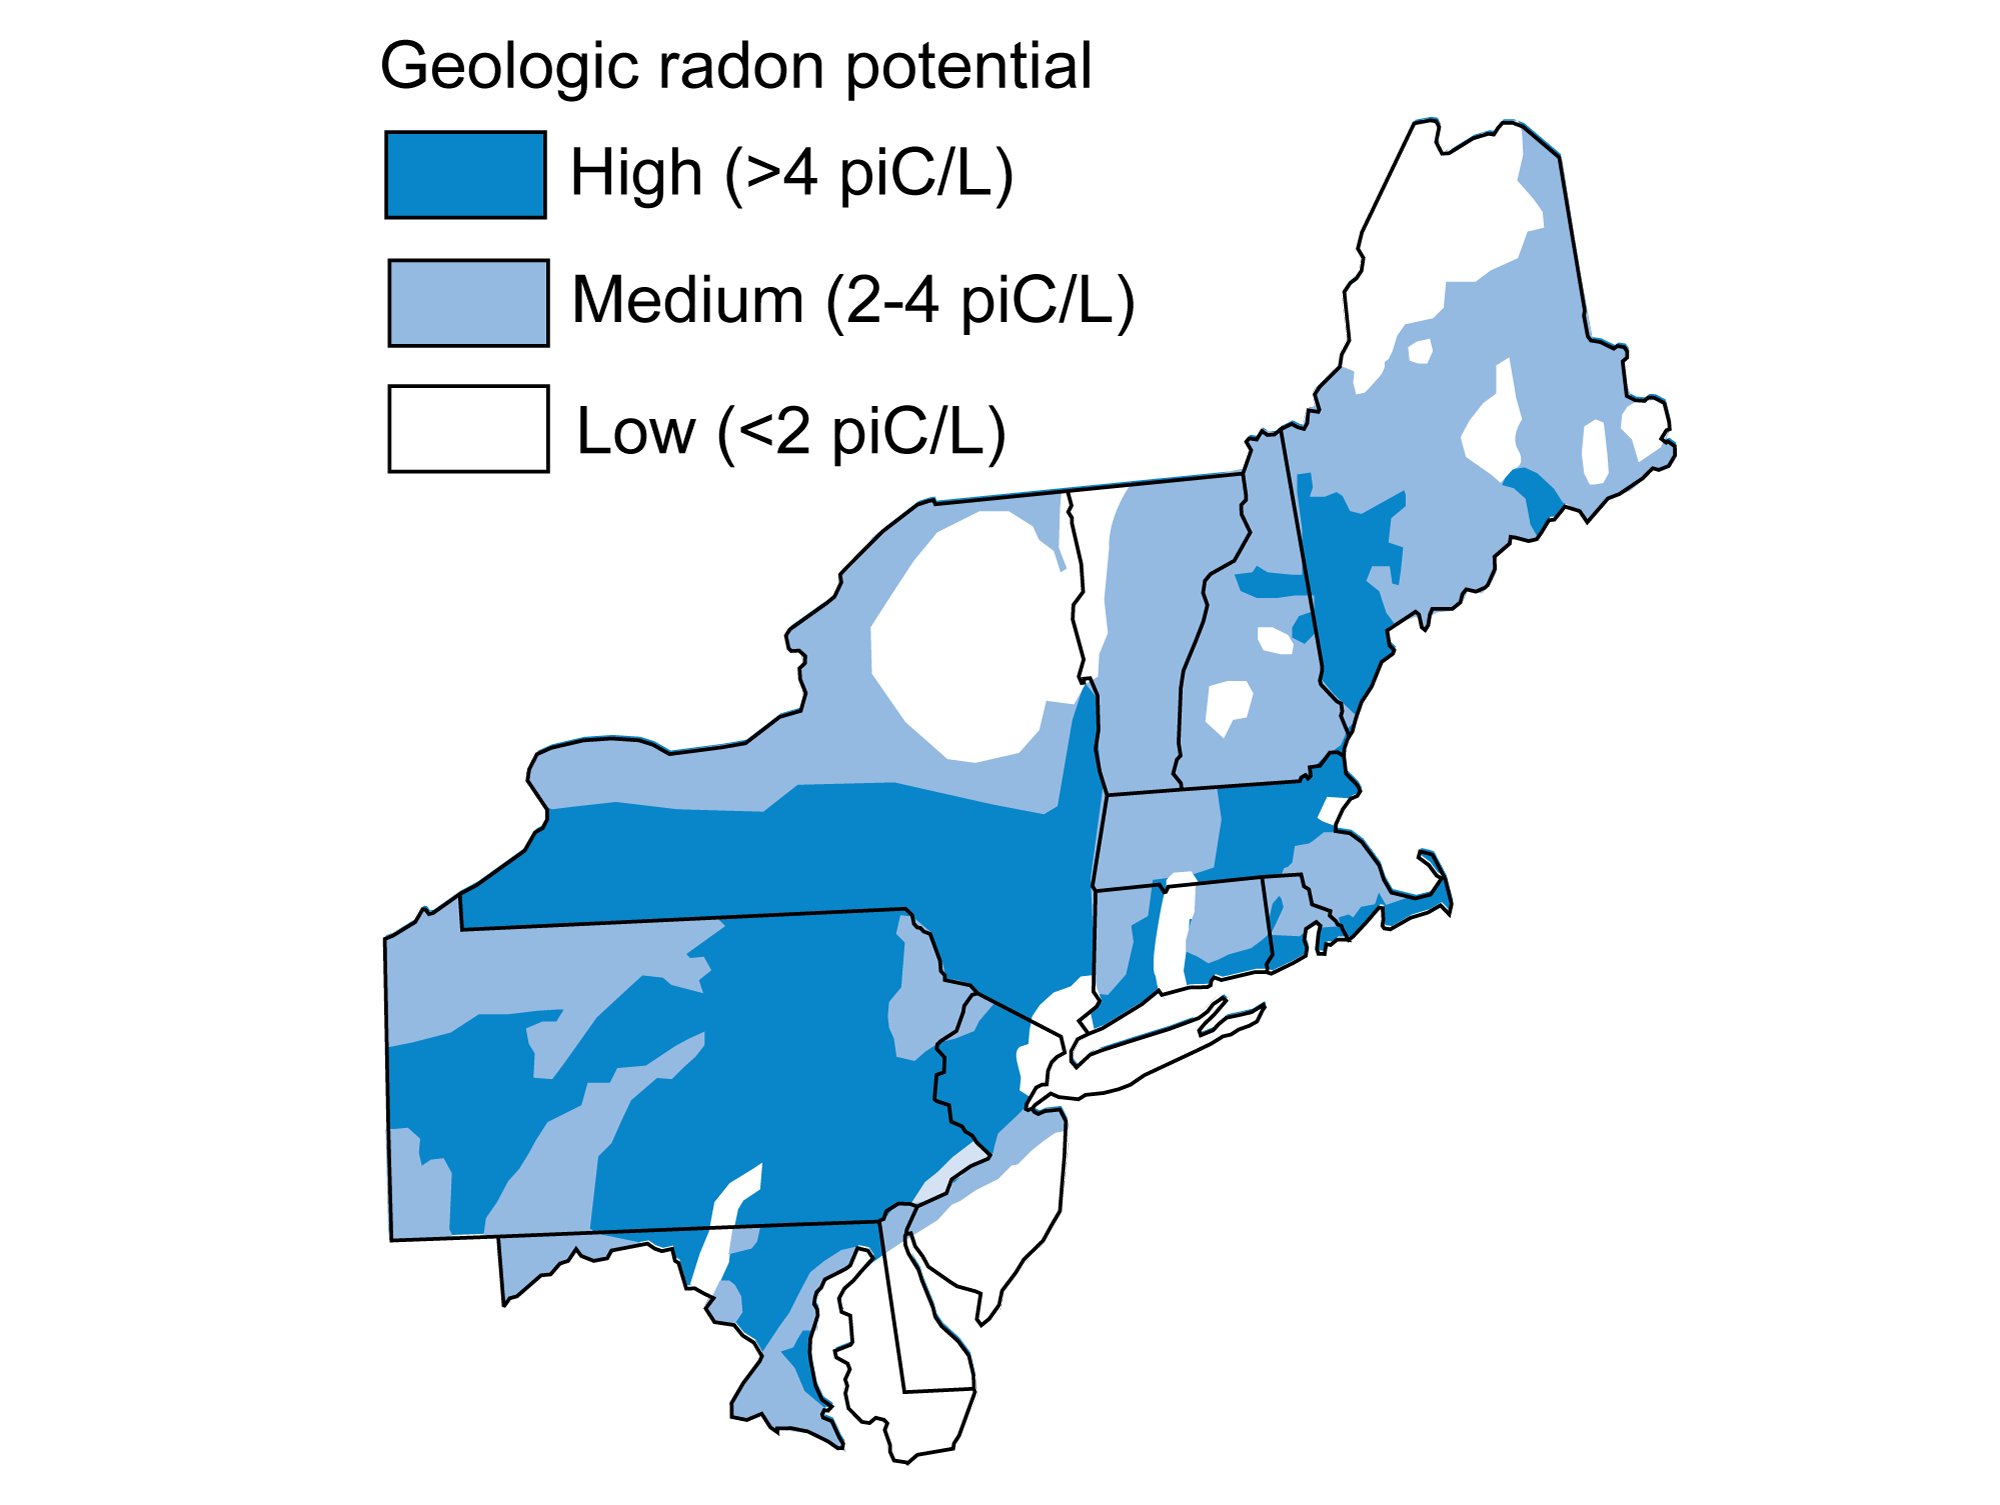 Map of the northeastern United States showing radon potential, with white areas having low potential, light blue areas having medium potential, and dark blue areas having high potential. The coastal plain, northeastern New York, northwestern Vermont, northern Maine and a few other small areas have low potential. Other areas have medium to high potential.